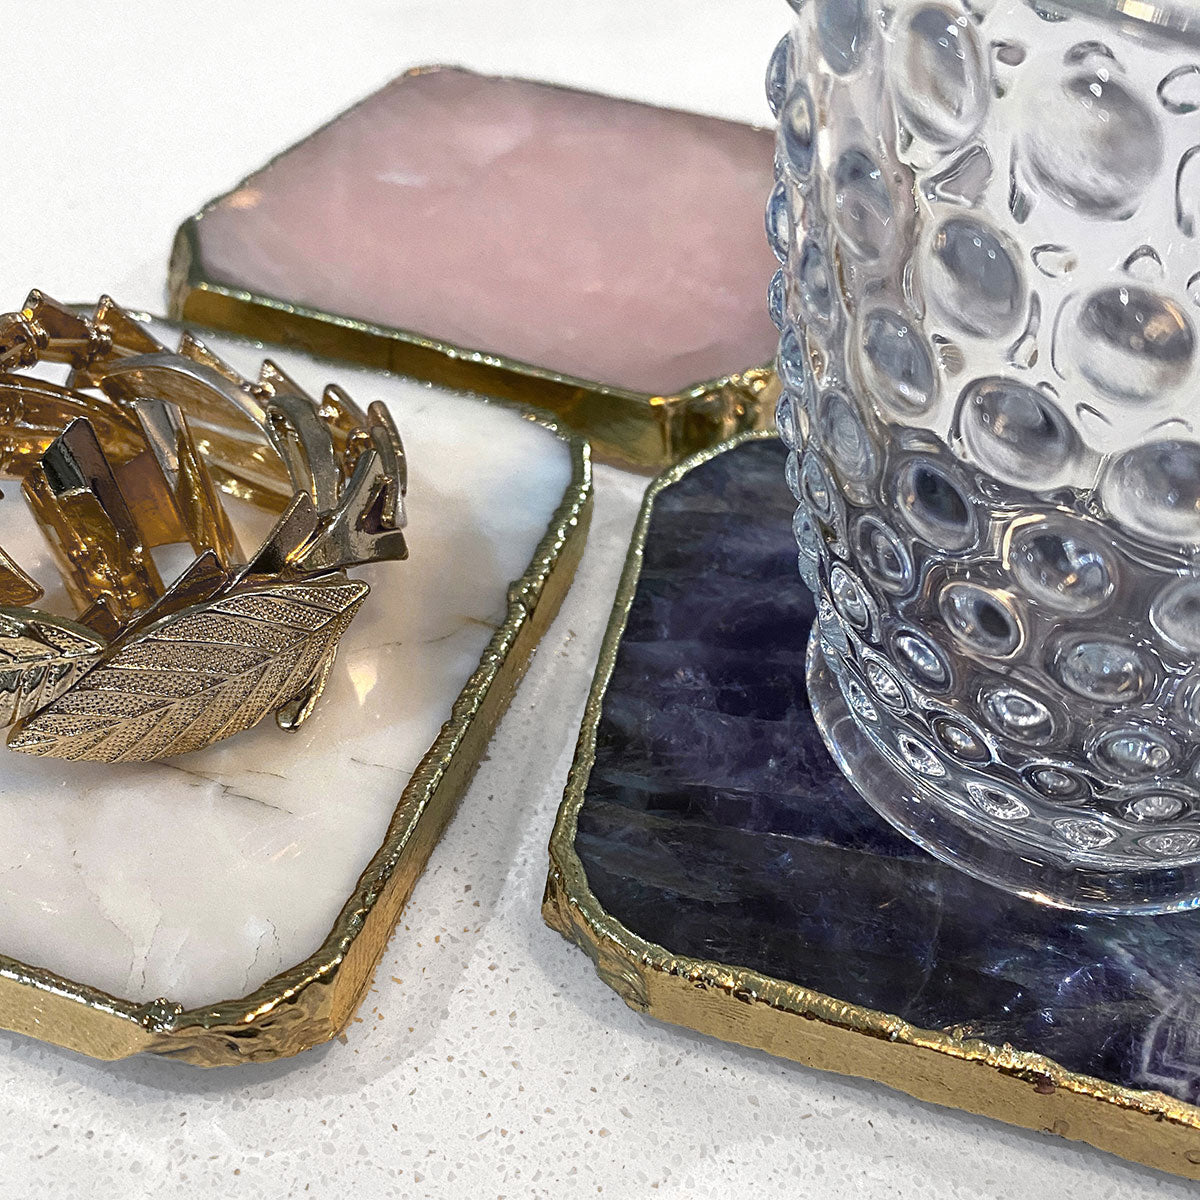 Agate Gold Edged Coasters in White Agate. Shown in situation with a drinking glass and jewellery on top of them, showing all 3 colours.